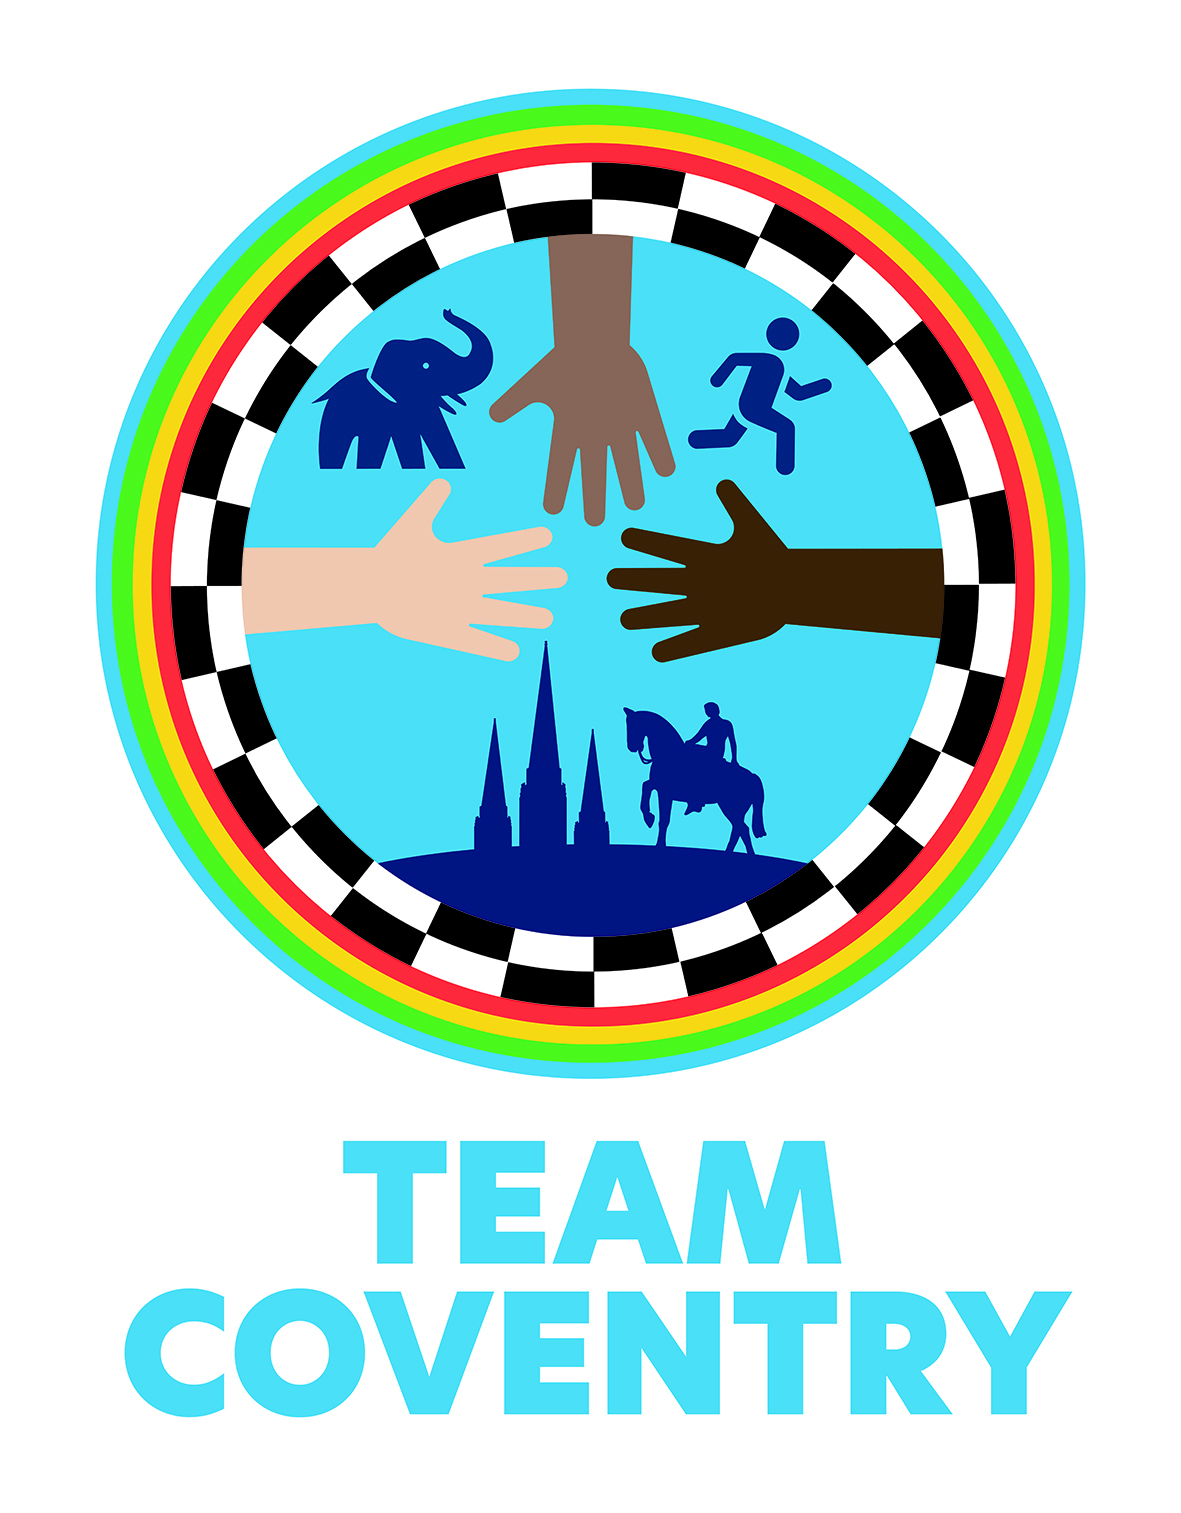 Team Coventry logo competition winner